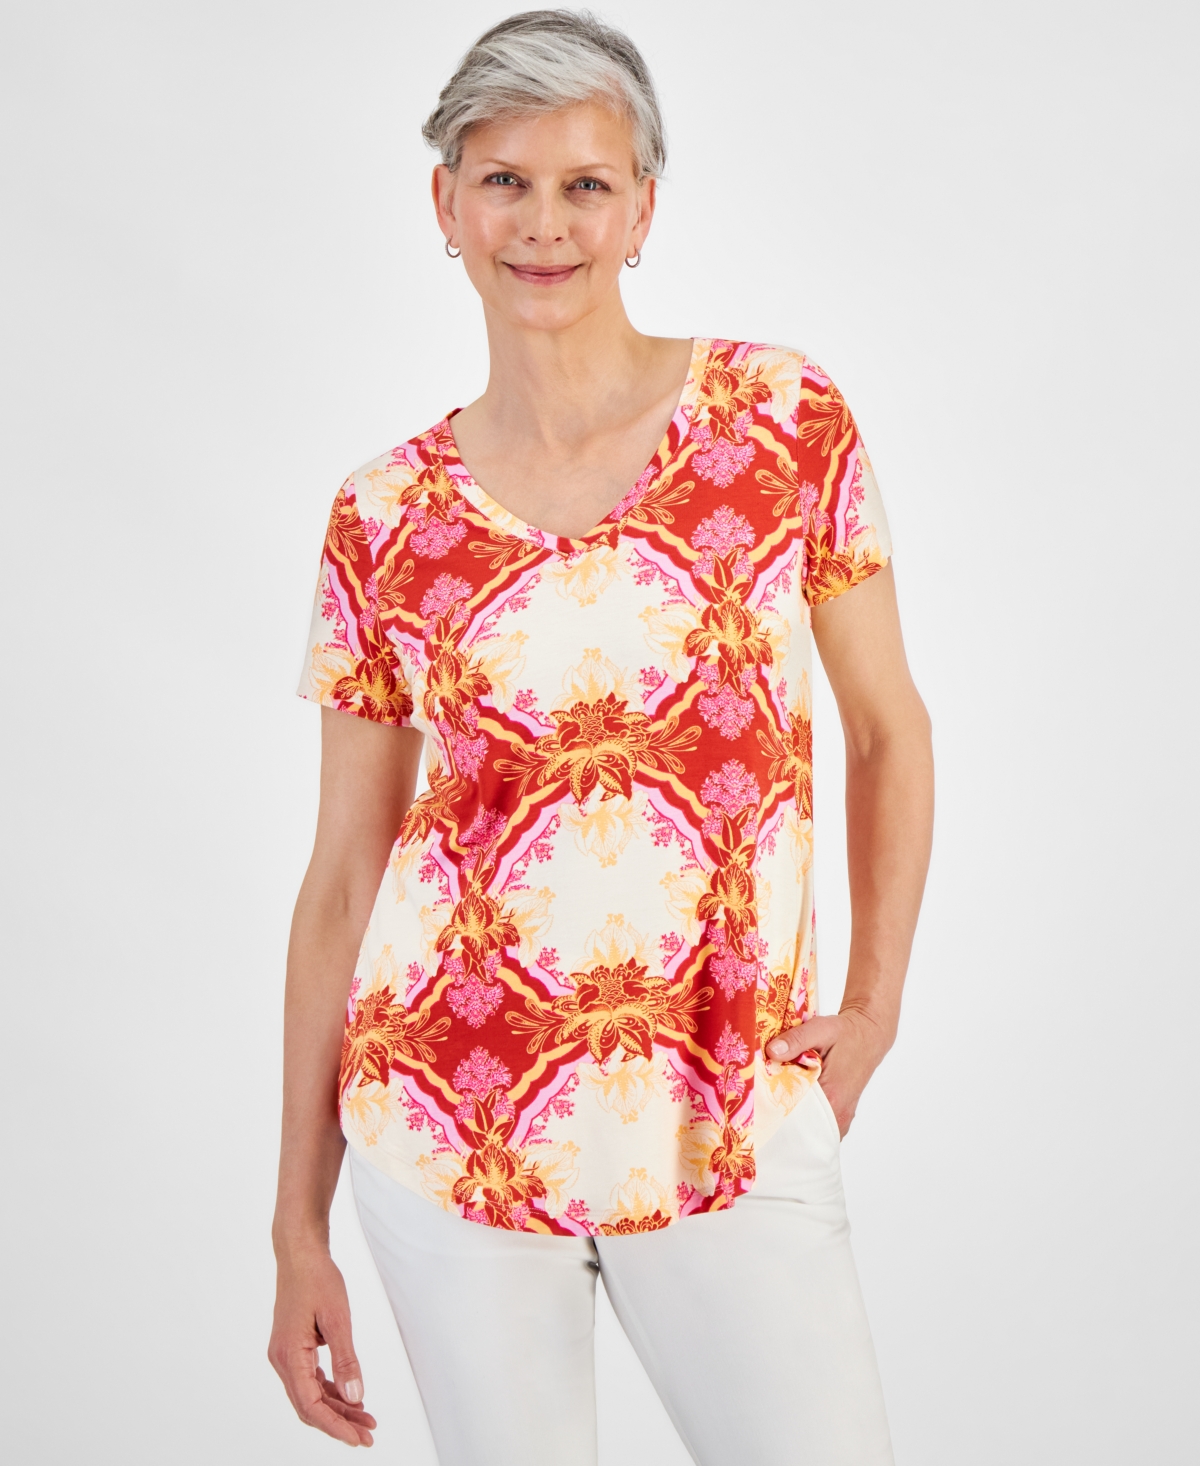 Women's Printed V-Neck Short-Sleeve Knit Top, Created for Macy's - Pumpkin Seed Combo